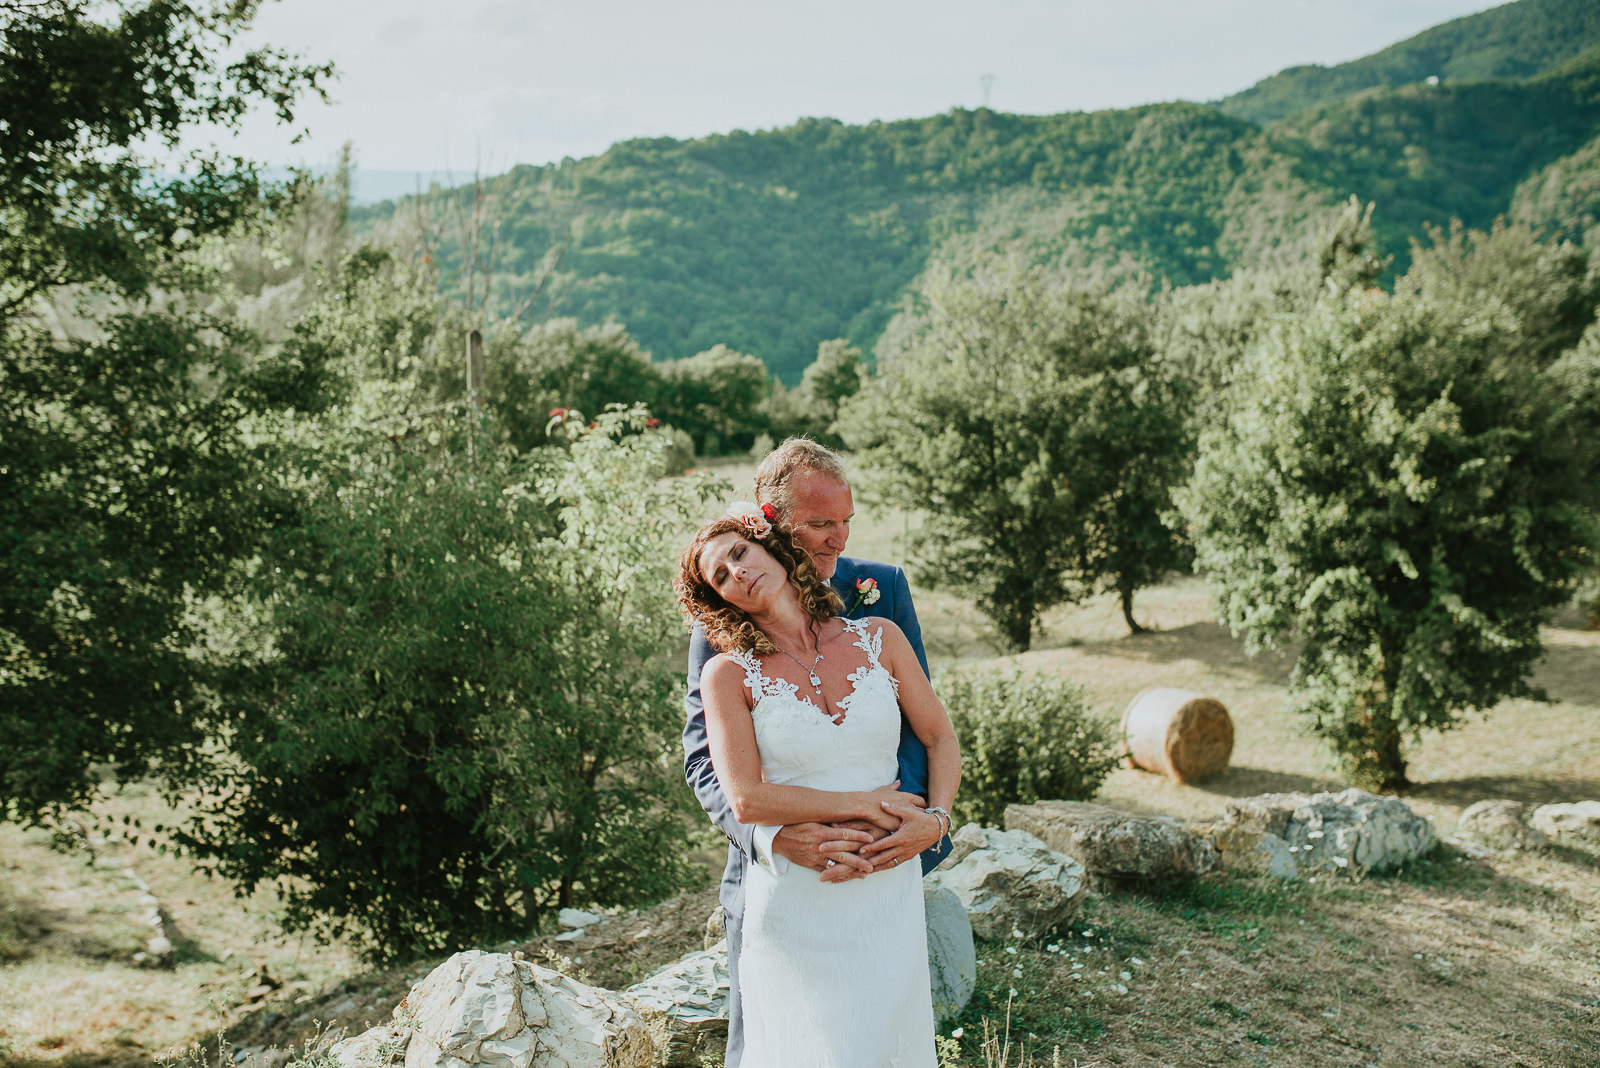 relaxed and natural portrait of bride and groom during a destination wedding in Tuscany countryside